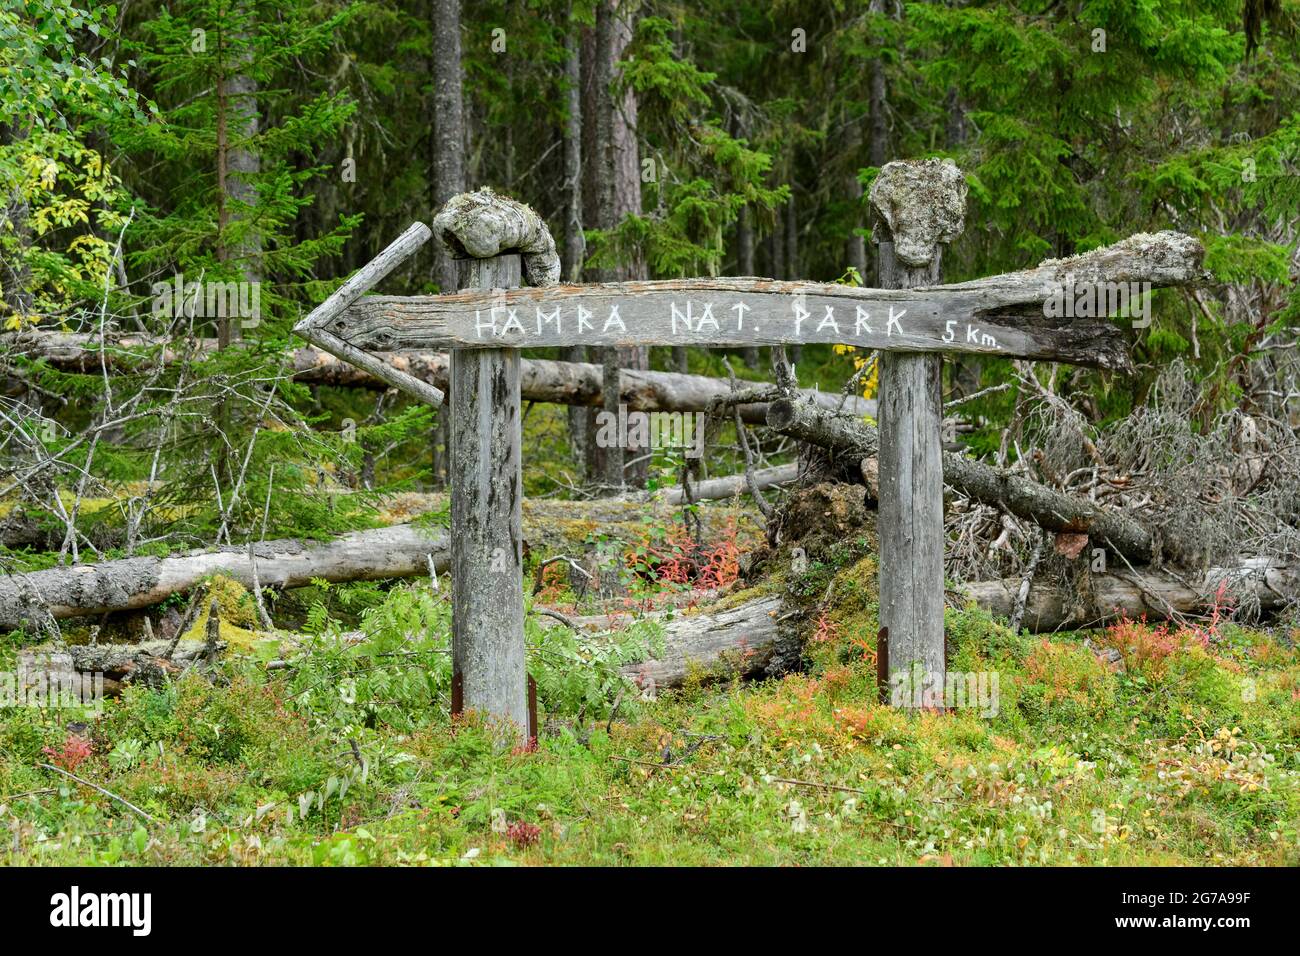 Wooden natural signpost to Hamra National Park, Sweden Stock Photo